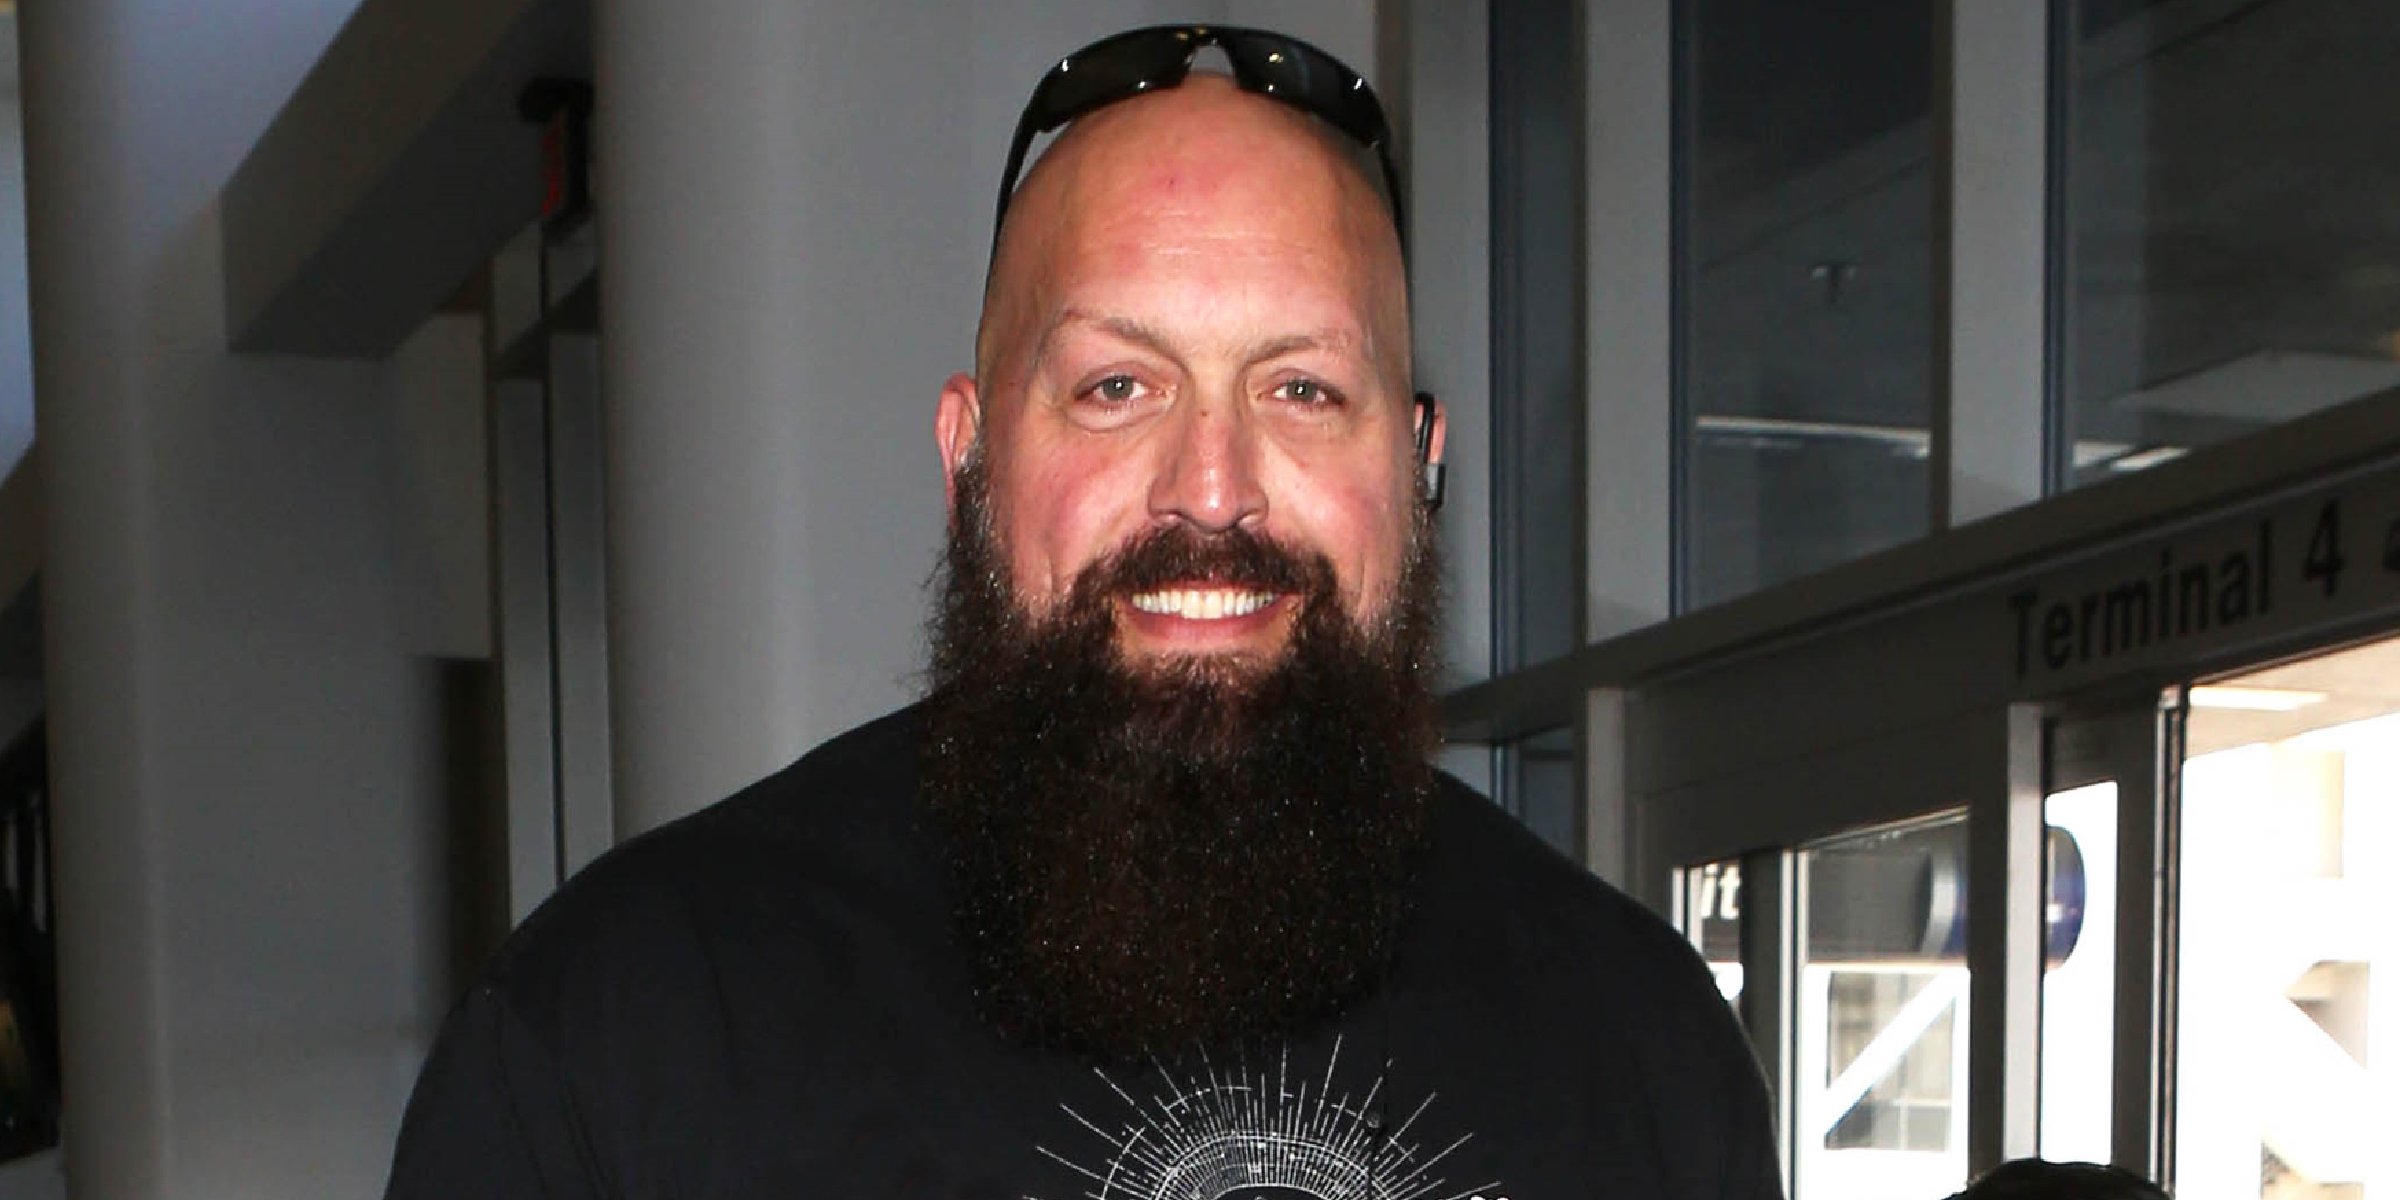 Paul "the Big Show" Wight. | Source: Getty Images